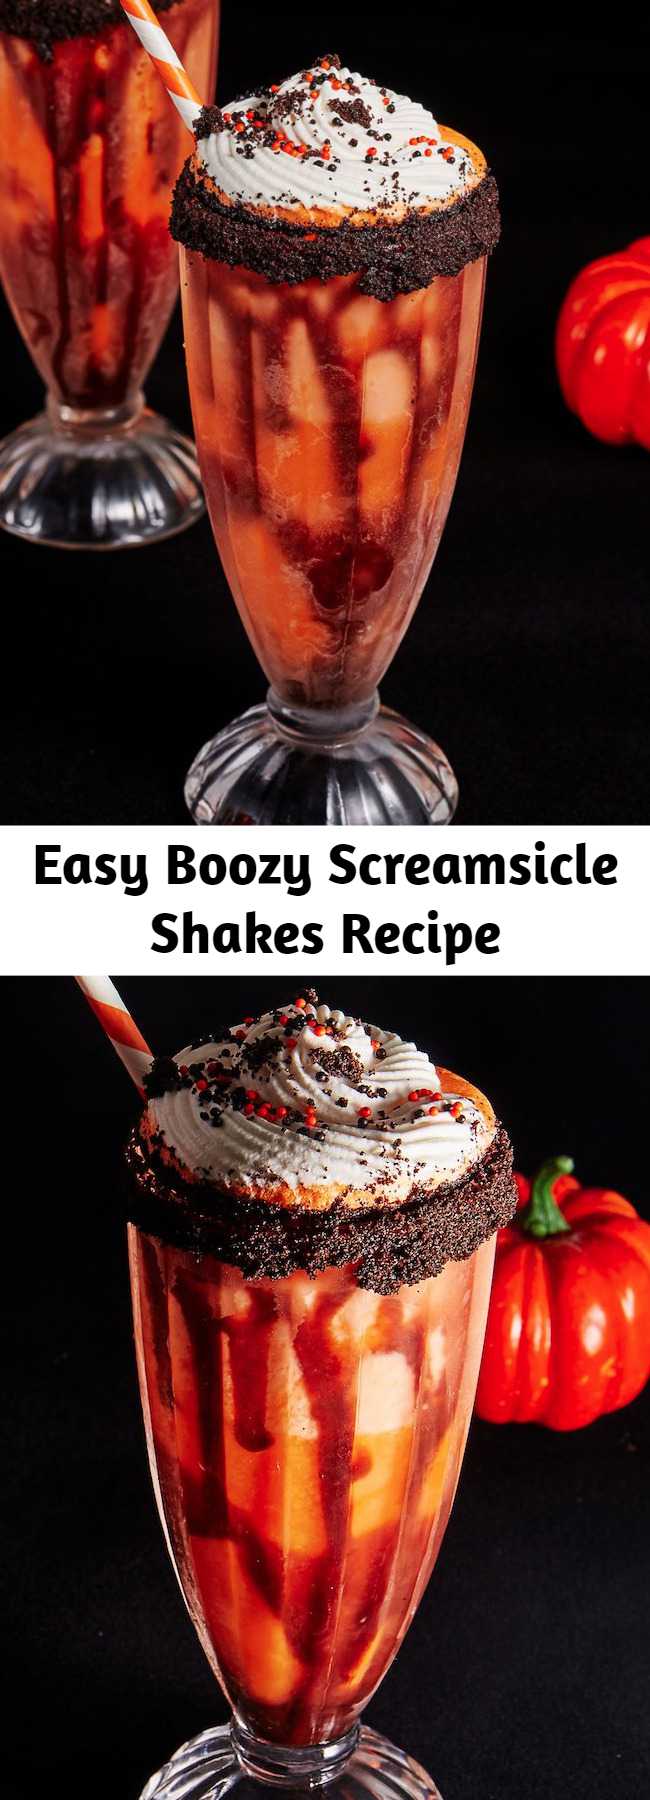 Easy Boozy Screamsicle Shakes Recipe - Getting excited for Halloween? Get the party started early with these delicious (and boozy) shakes!